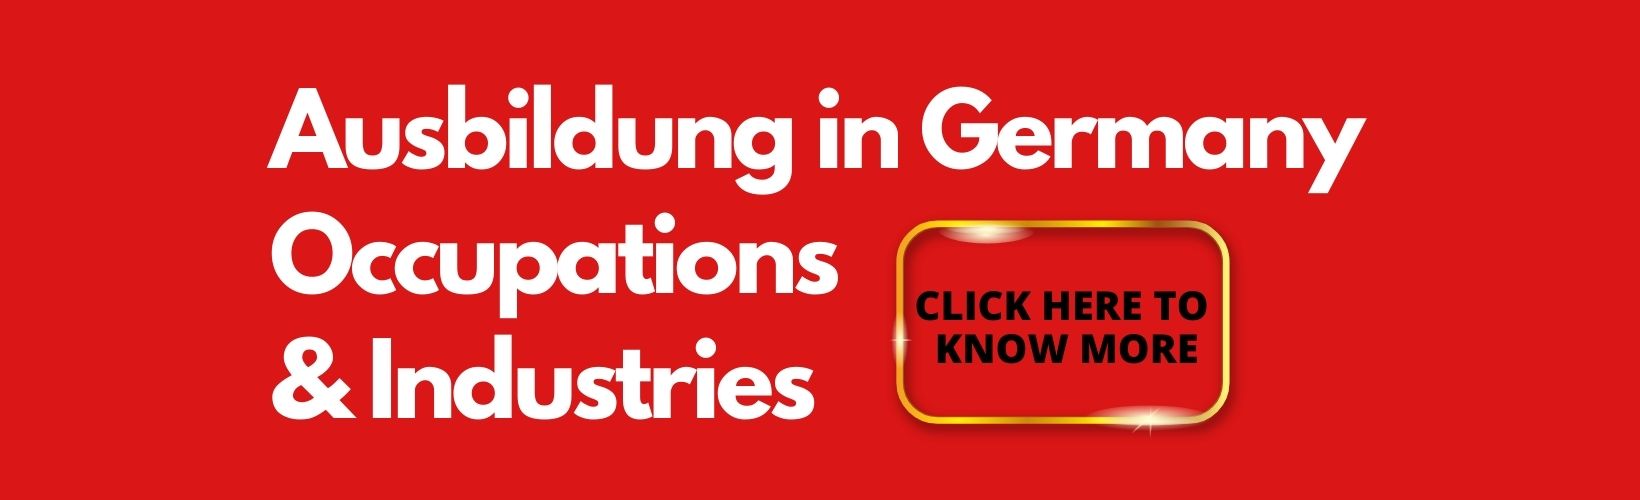 Ausbildung in Germany Occupations and Industries